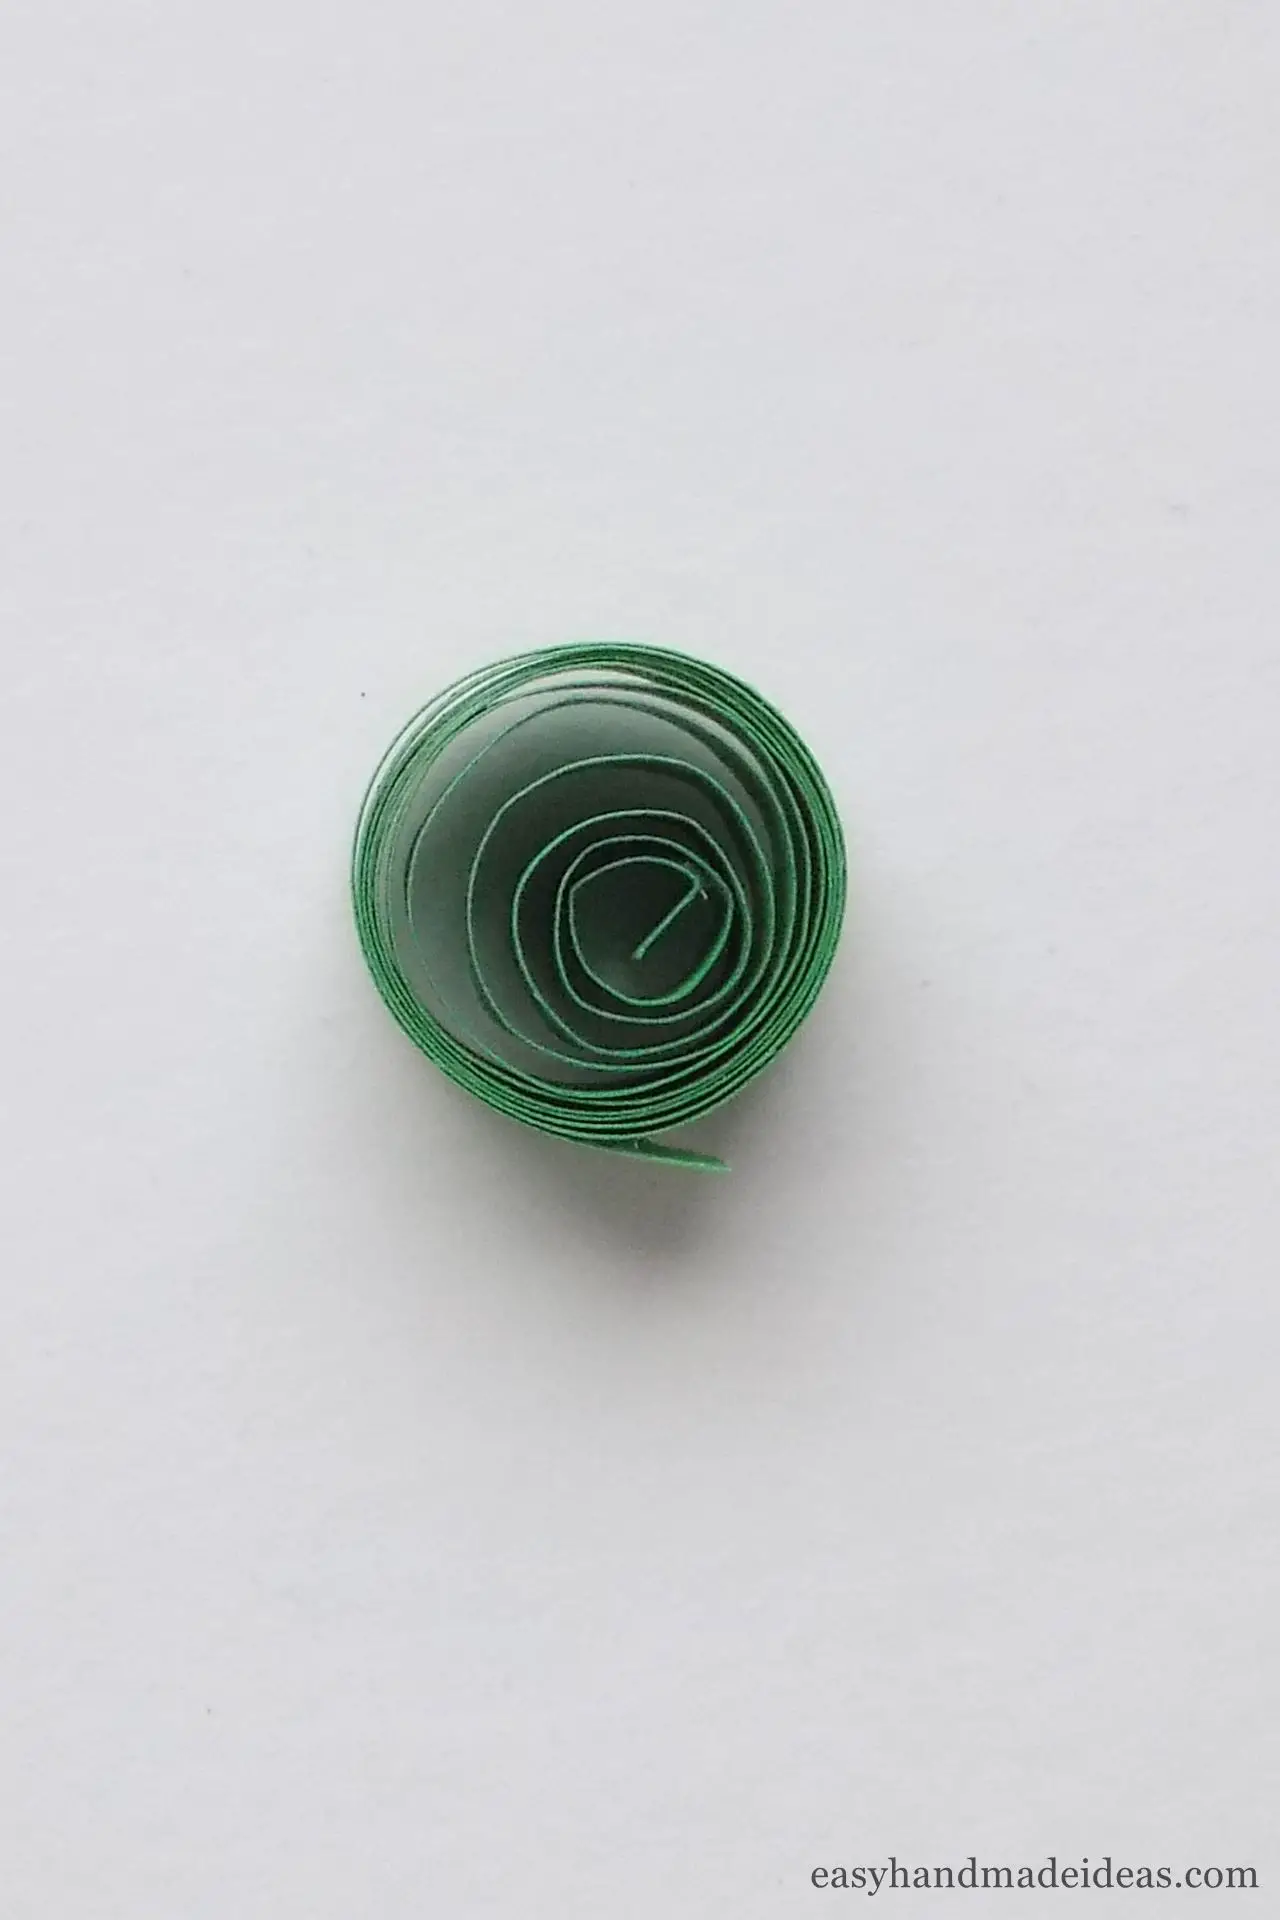 Fix the tip of the green coil